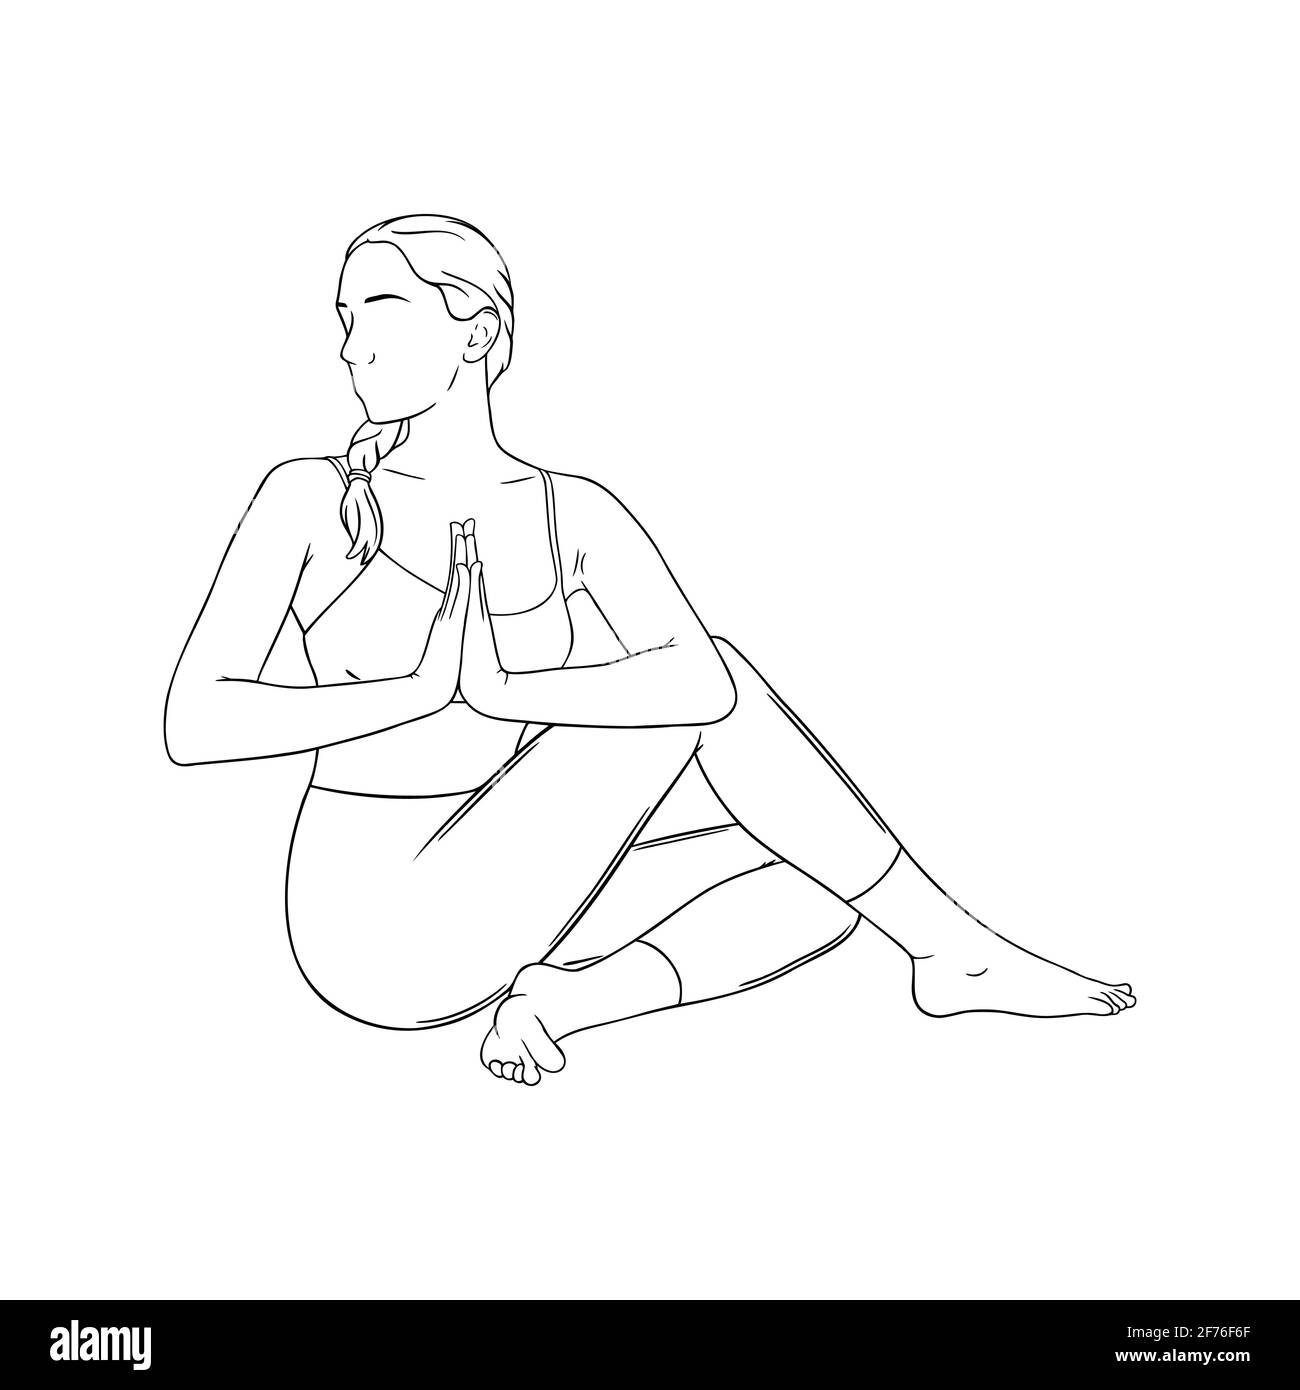 Pose Reference for Artists - Female - Sitting PoseMuse.com is our portal to  poses you can use for your own art. We have collected these renditions and  made them available both as